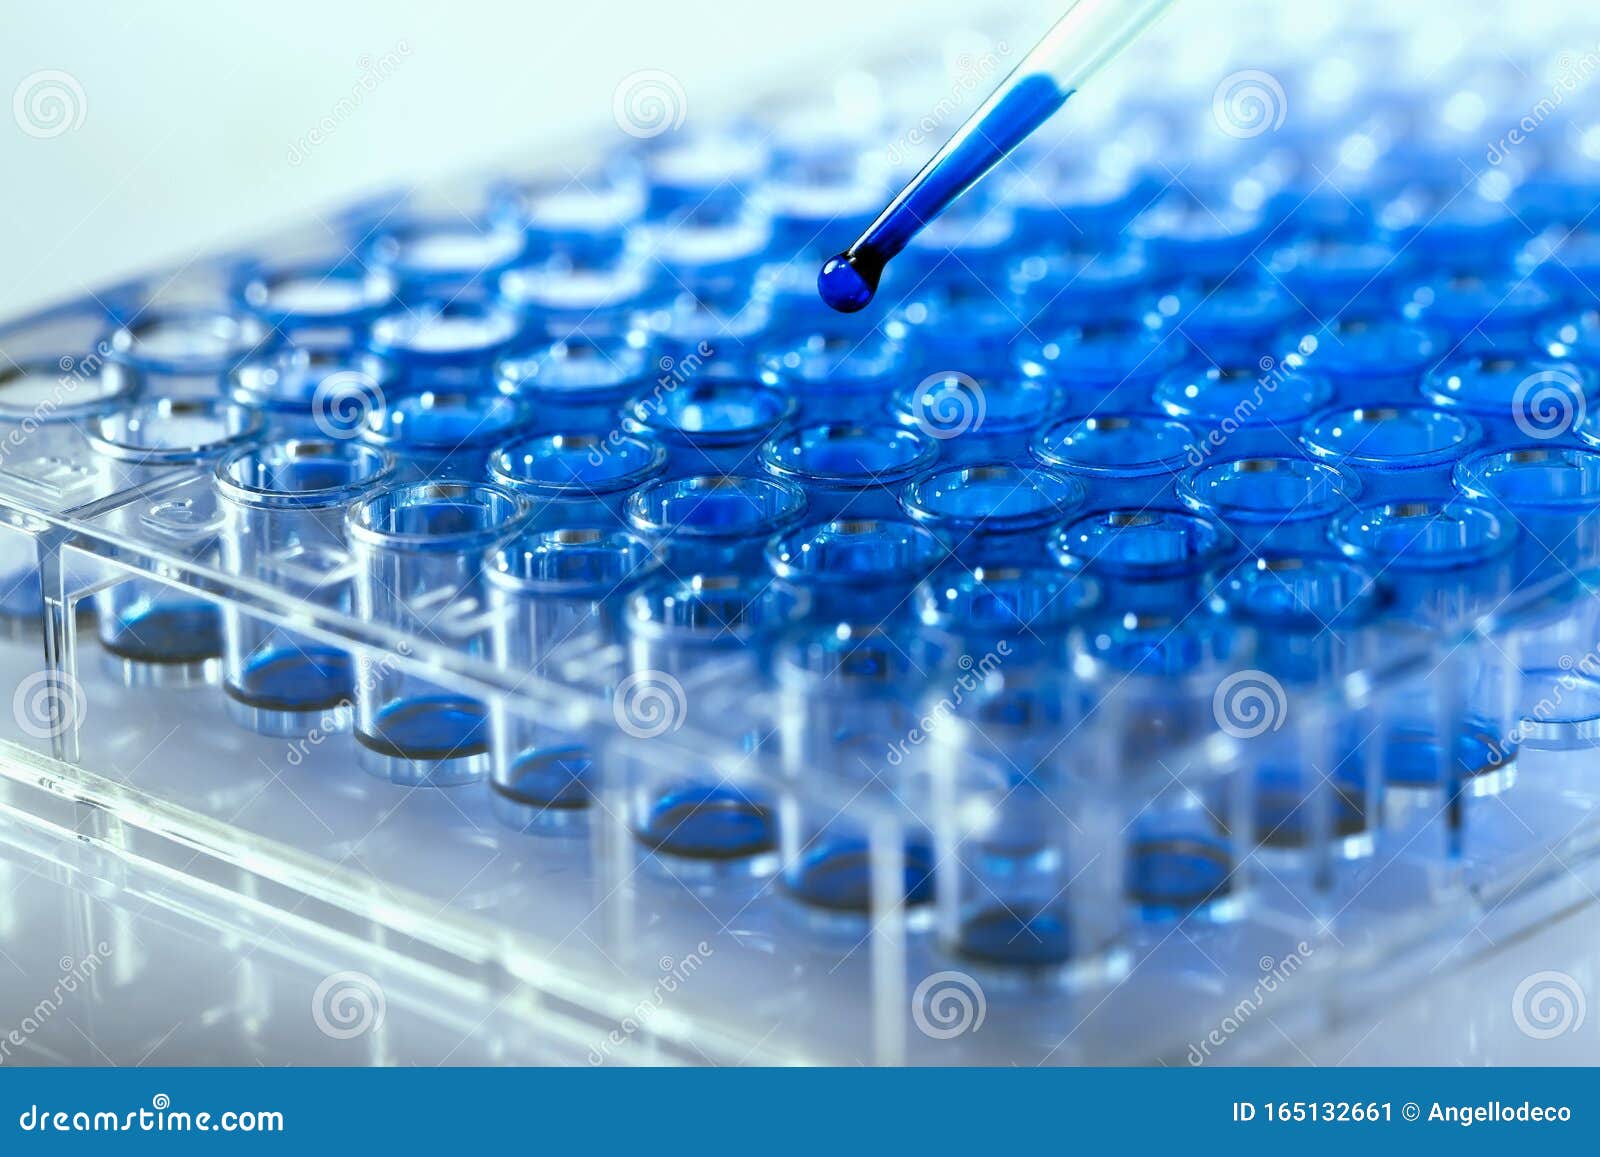 researcher pipetting samples of liquids in microplate for biomedical research